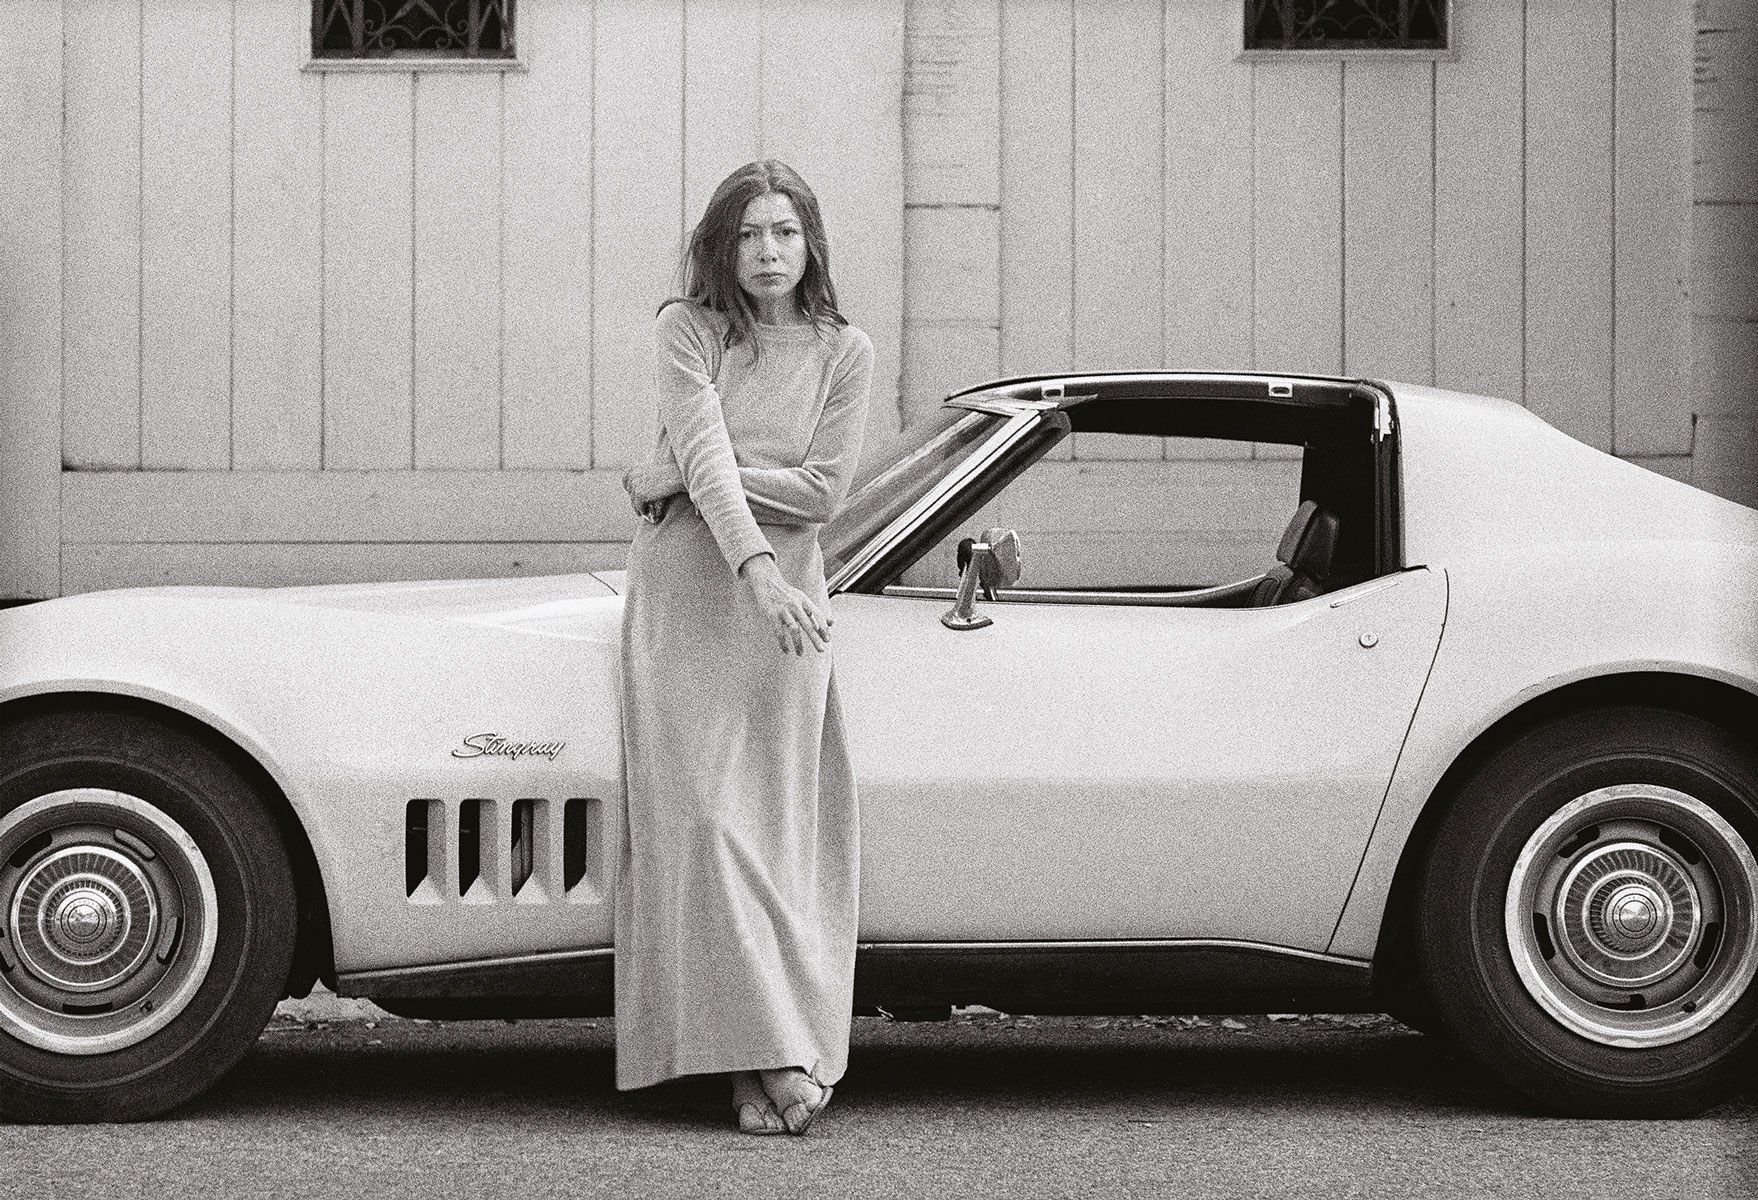 Why literary legend Joan Didion is fashion’s ageless style icon